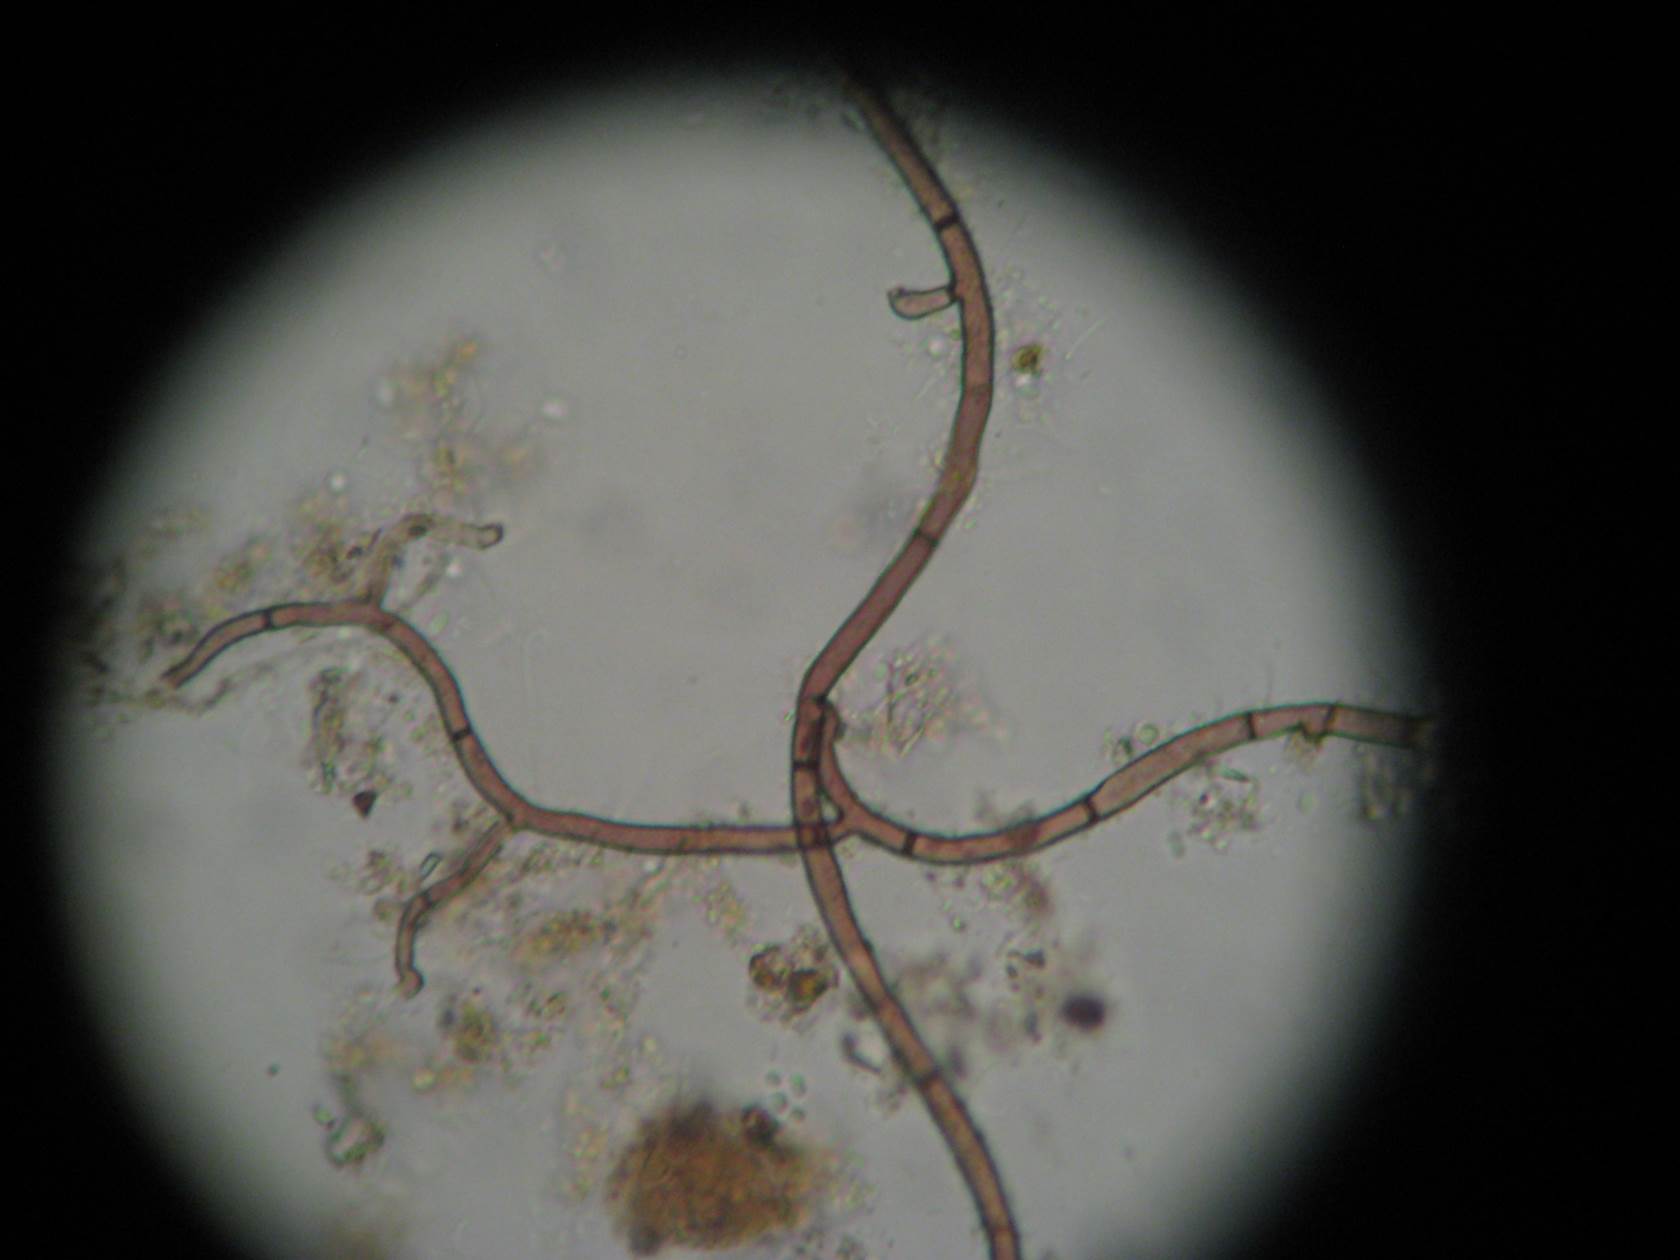 Beneficial Fungi Magnified 400X